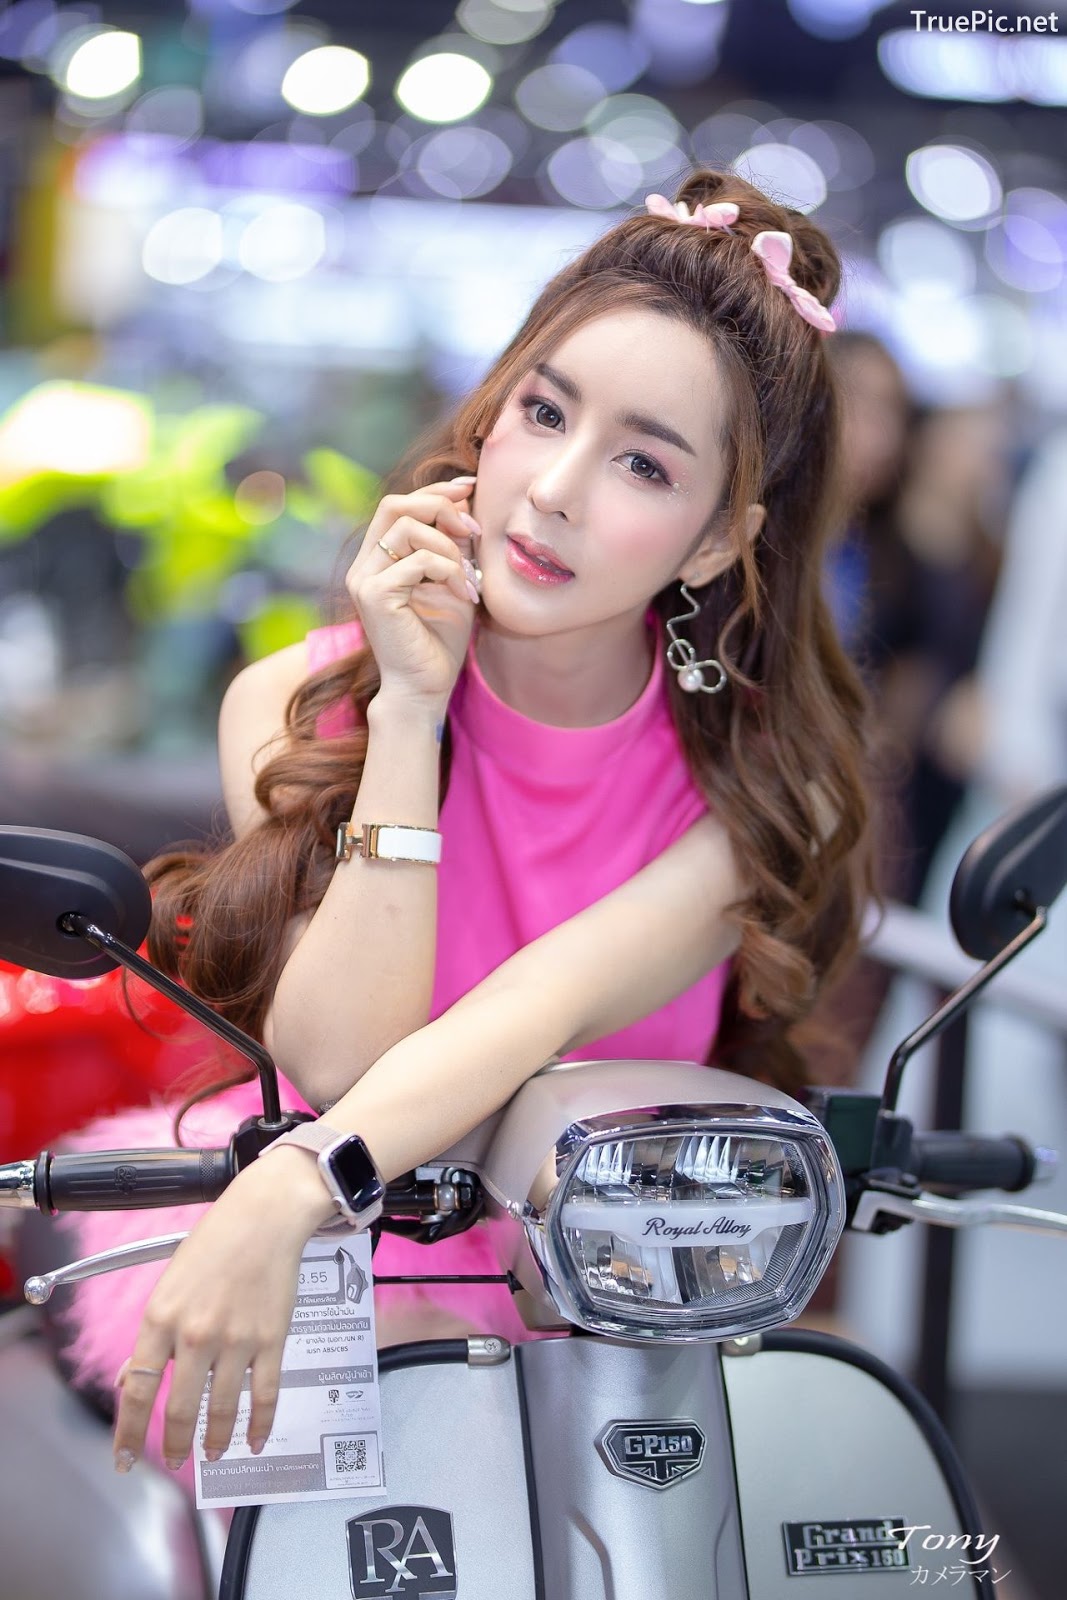 Image-Thailand-Hot-Model-Thai-Racing-Girl-At-Motor-Expo-2019-TruePic.net- Picture-101